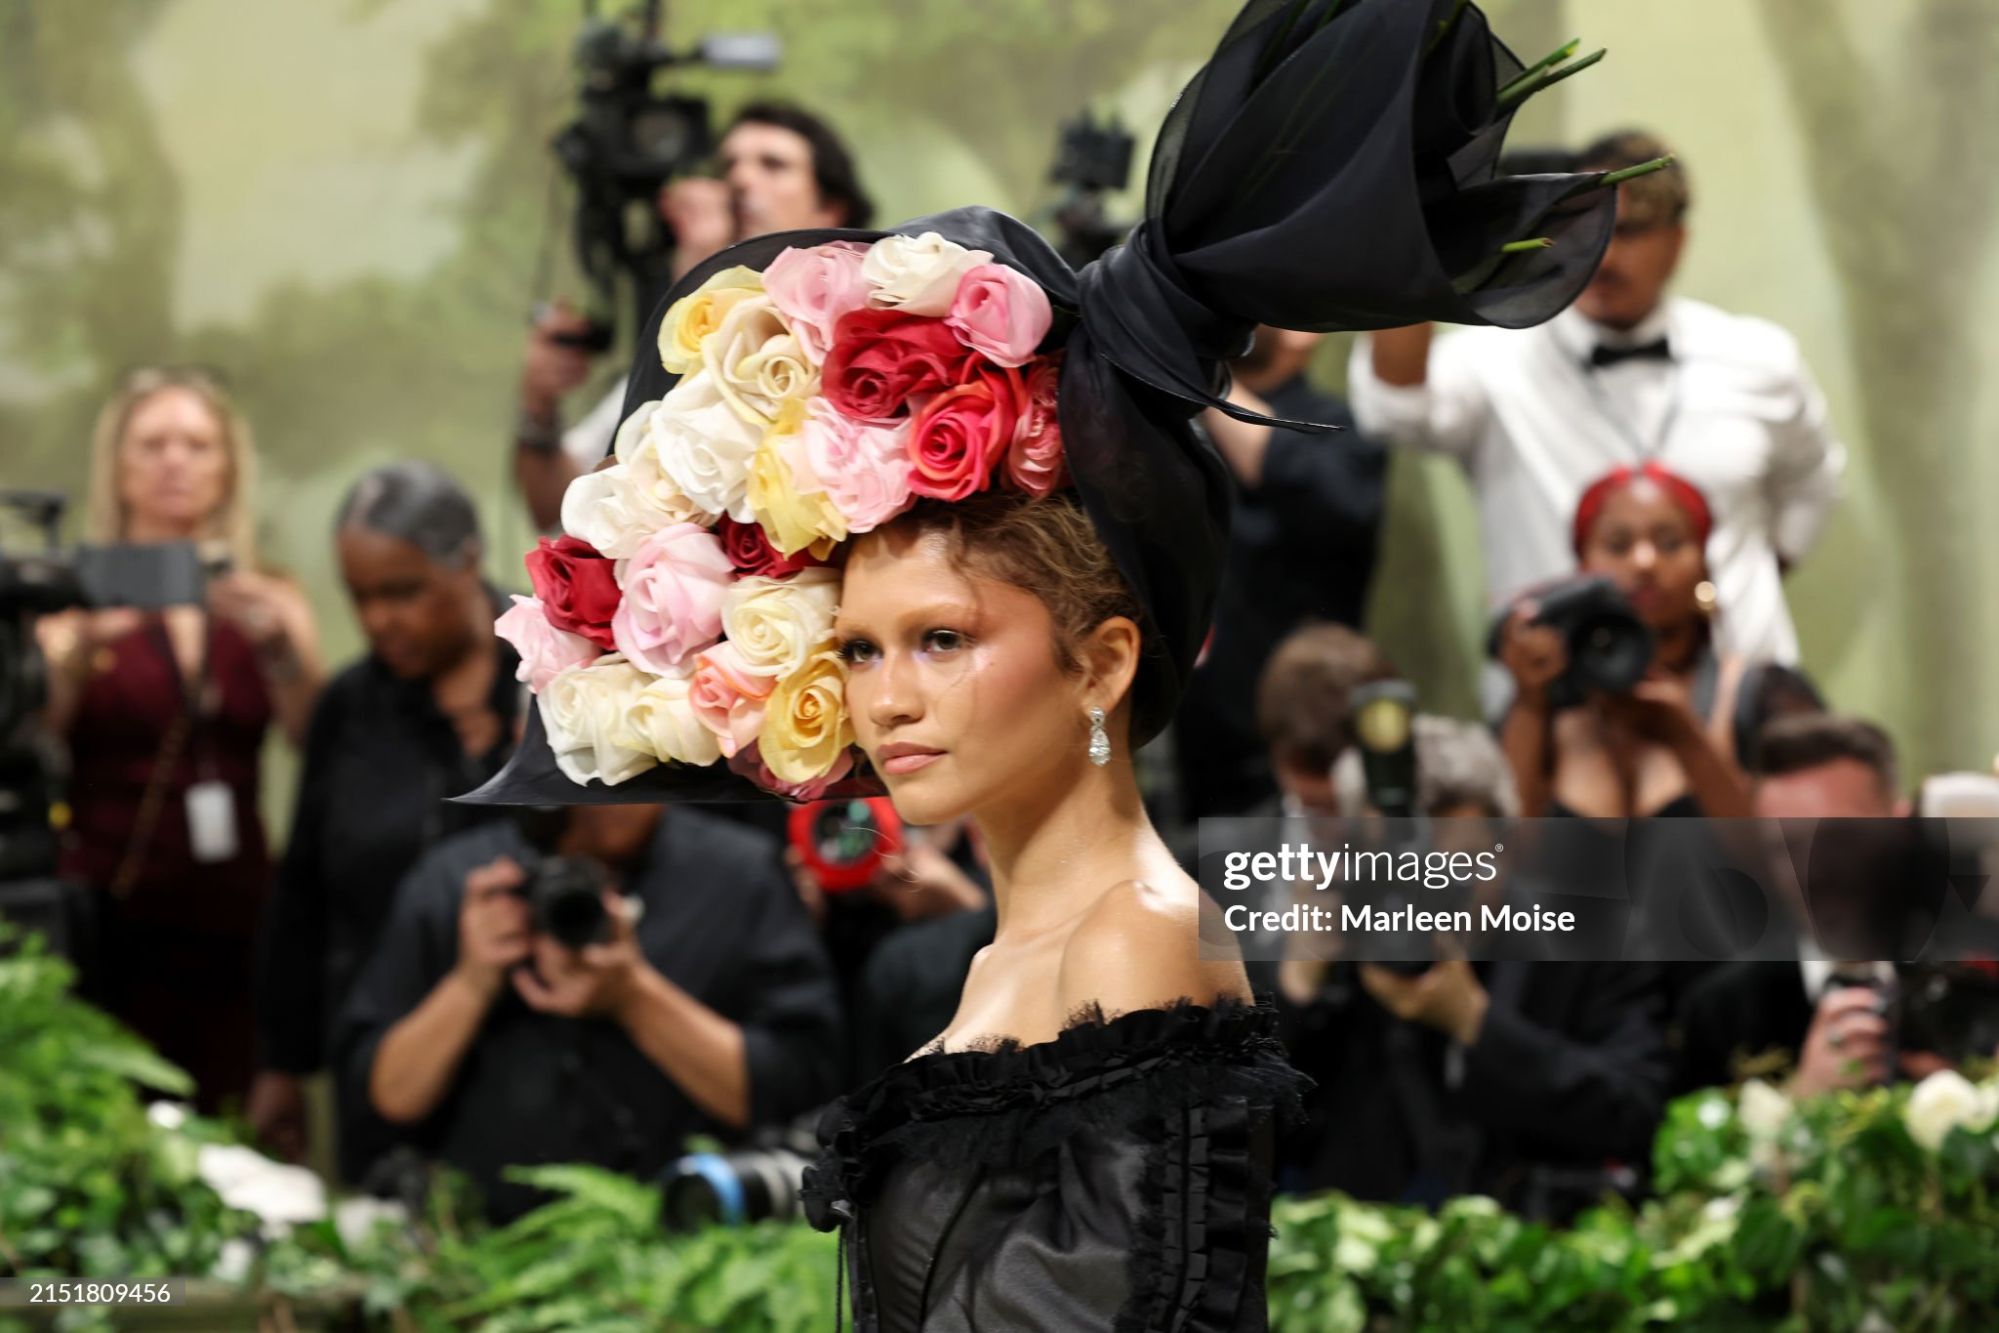 gettyimages-2151809456-2048x2048.jpg